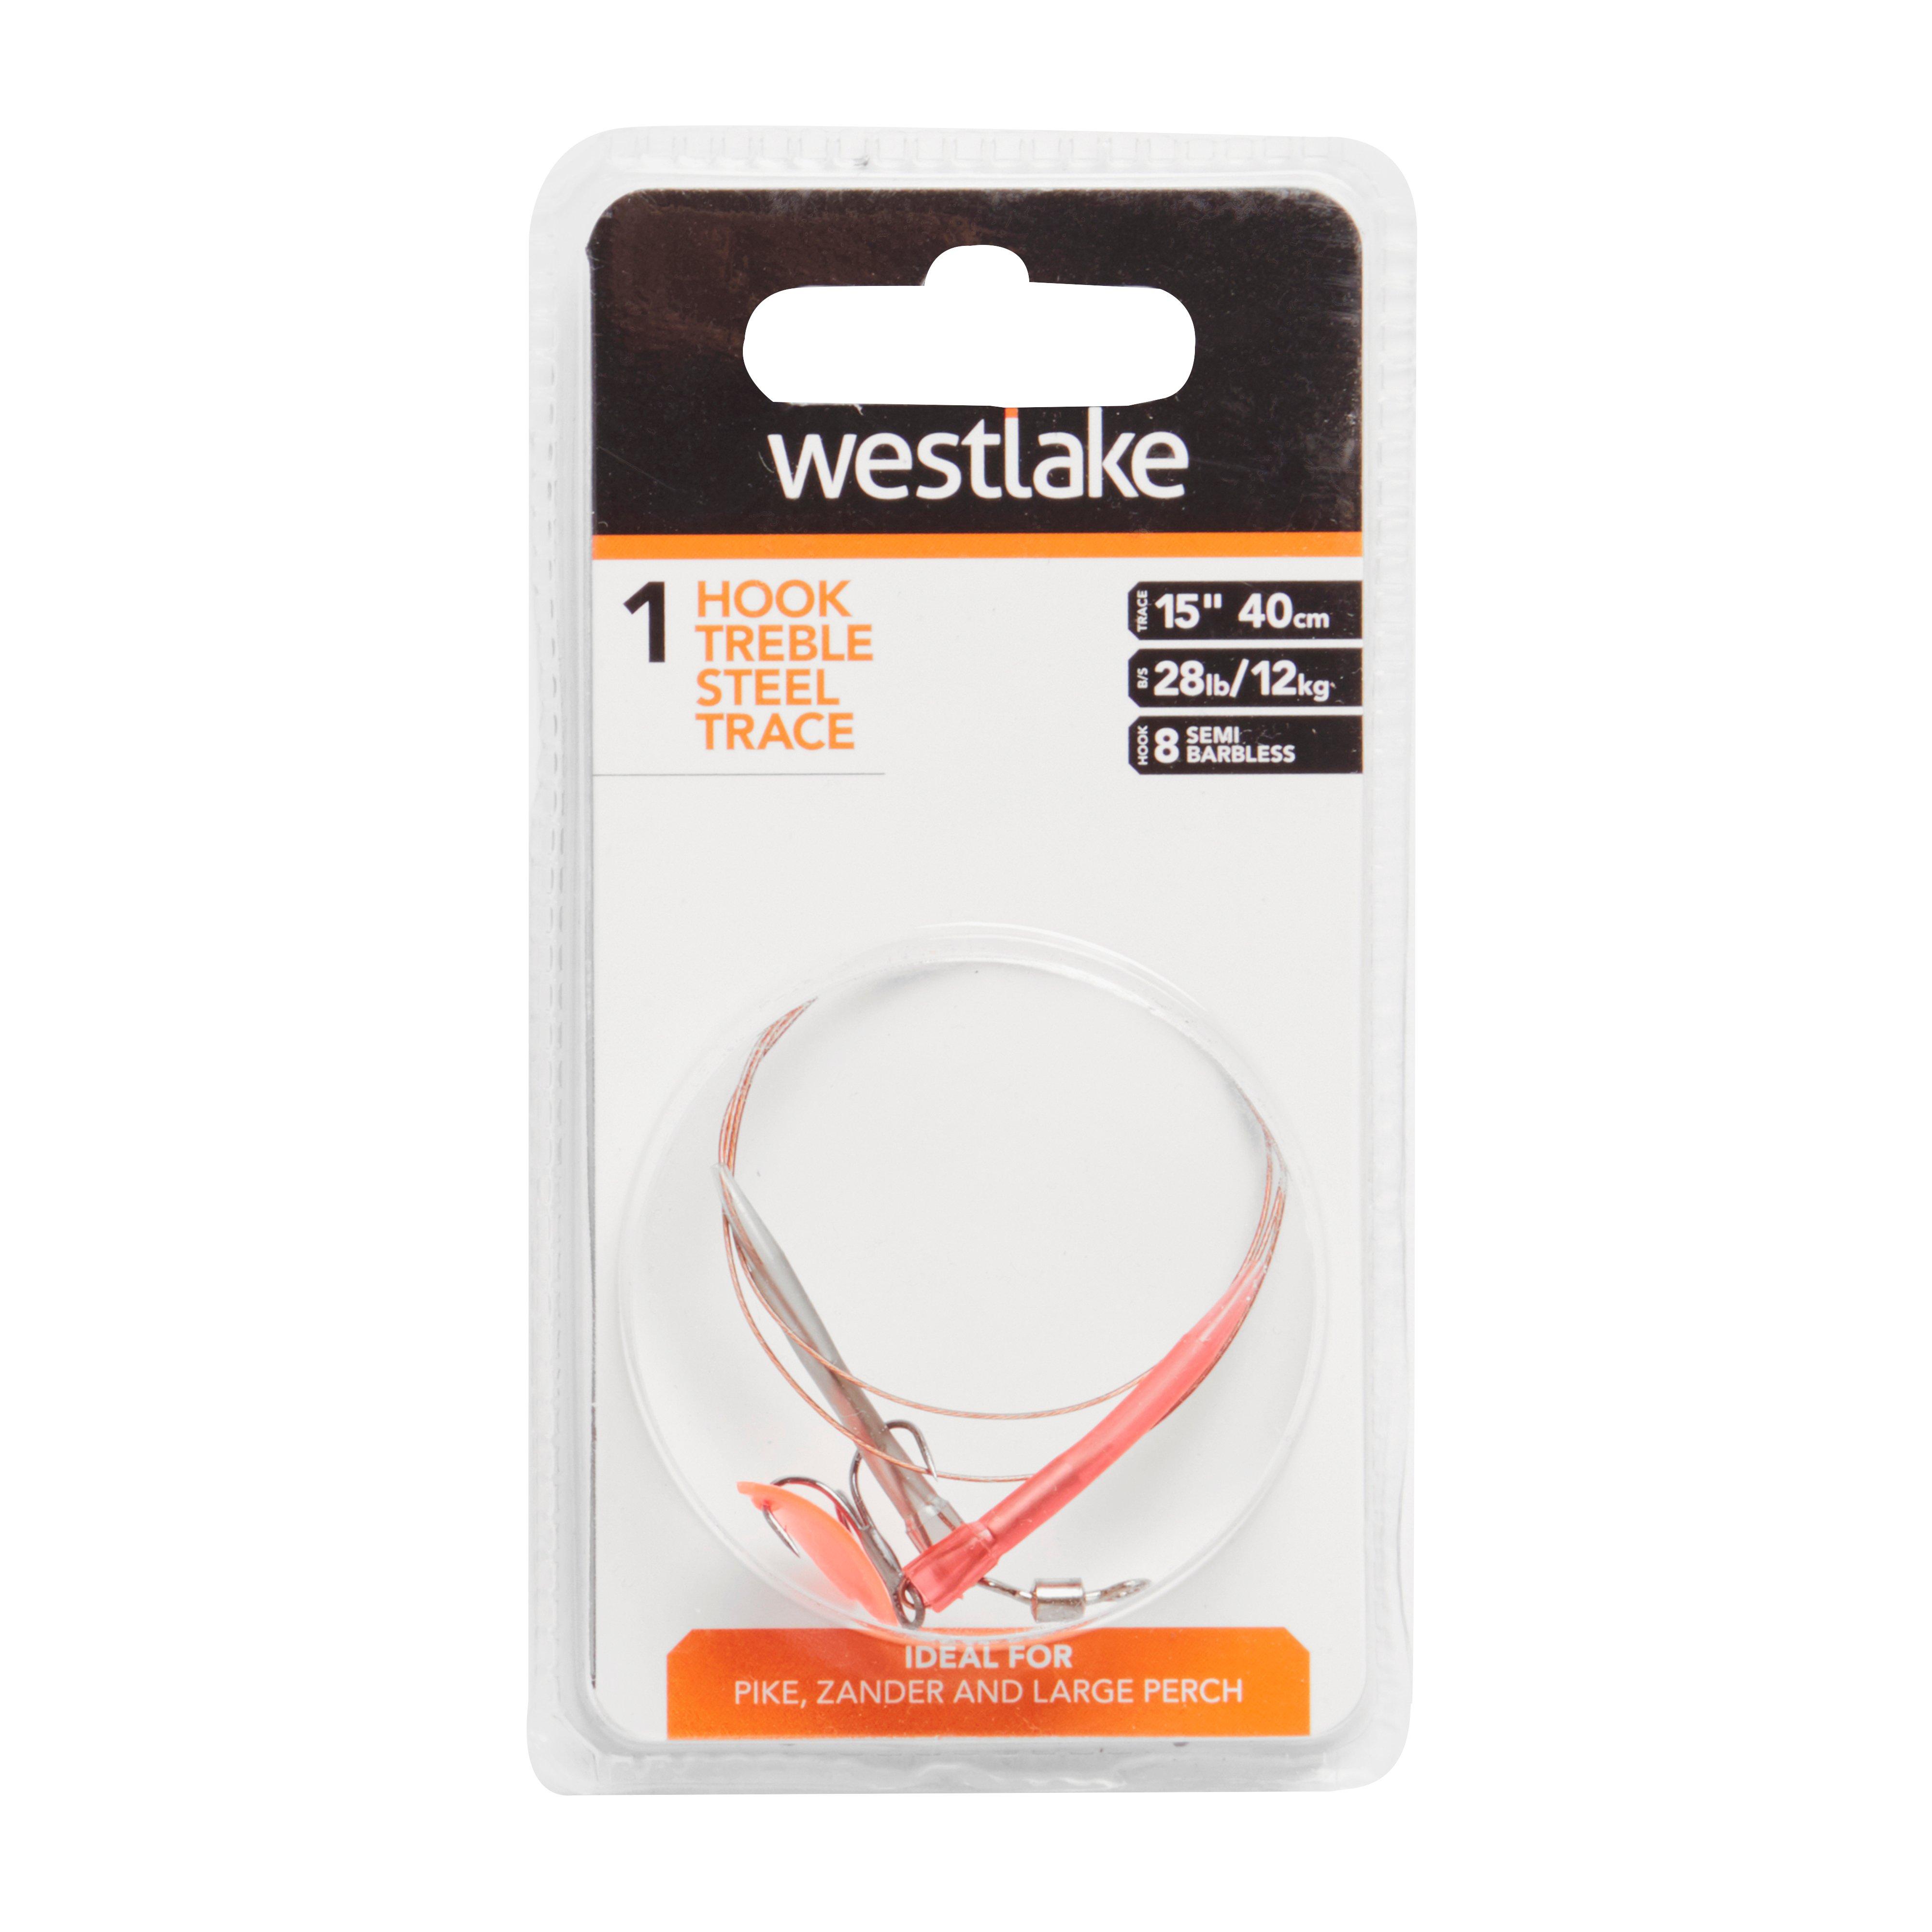 Westlake Snap Tackle Size 8 Rig Review